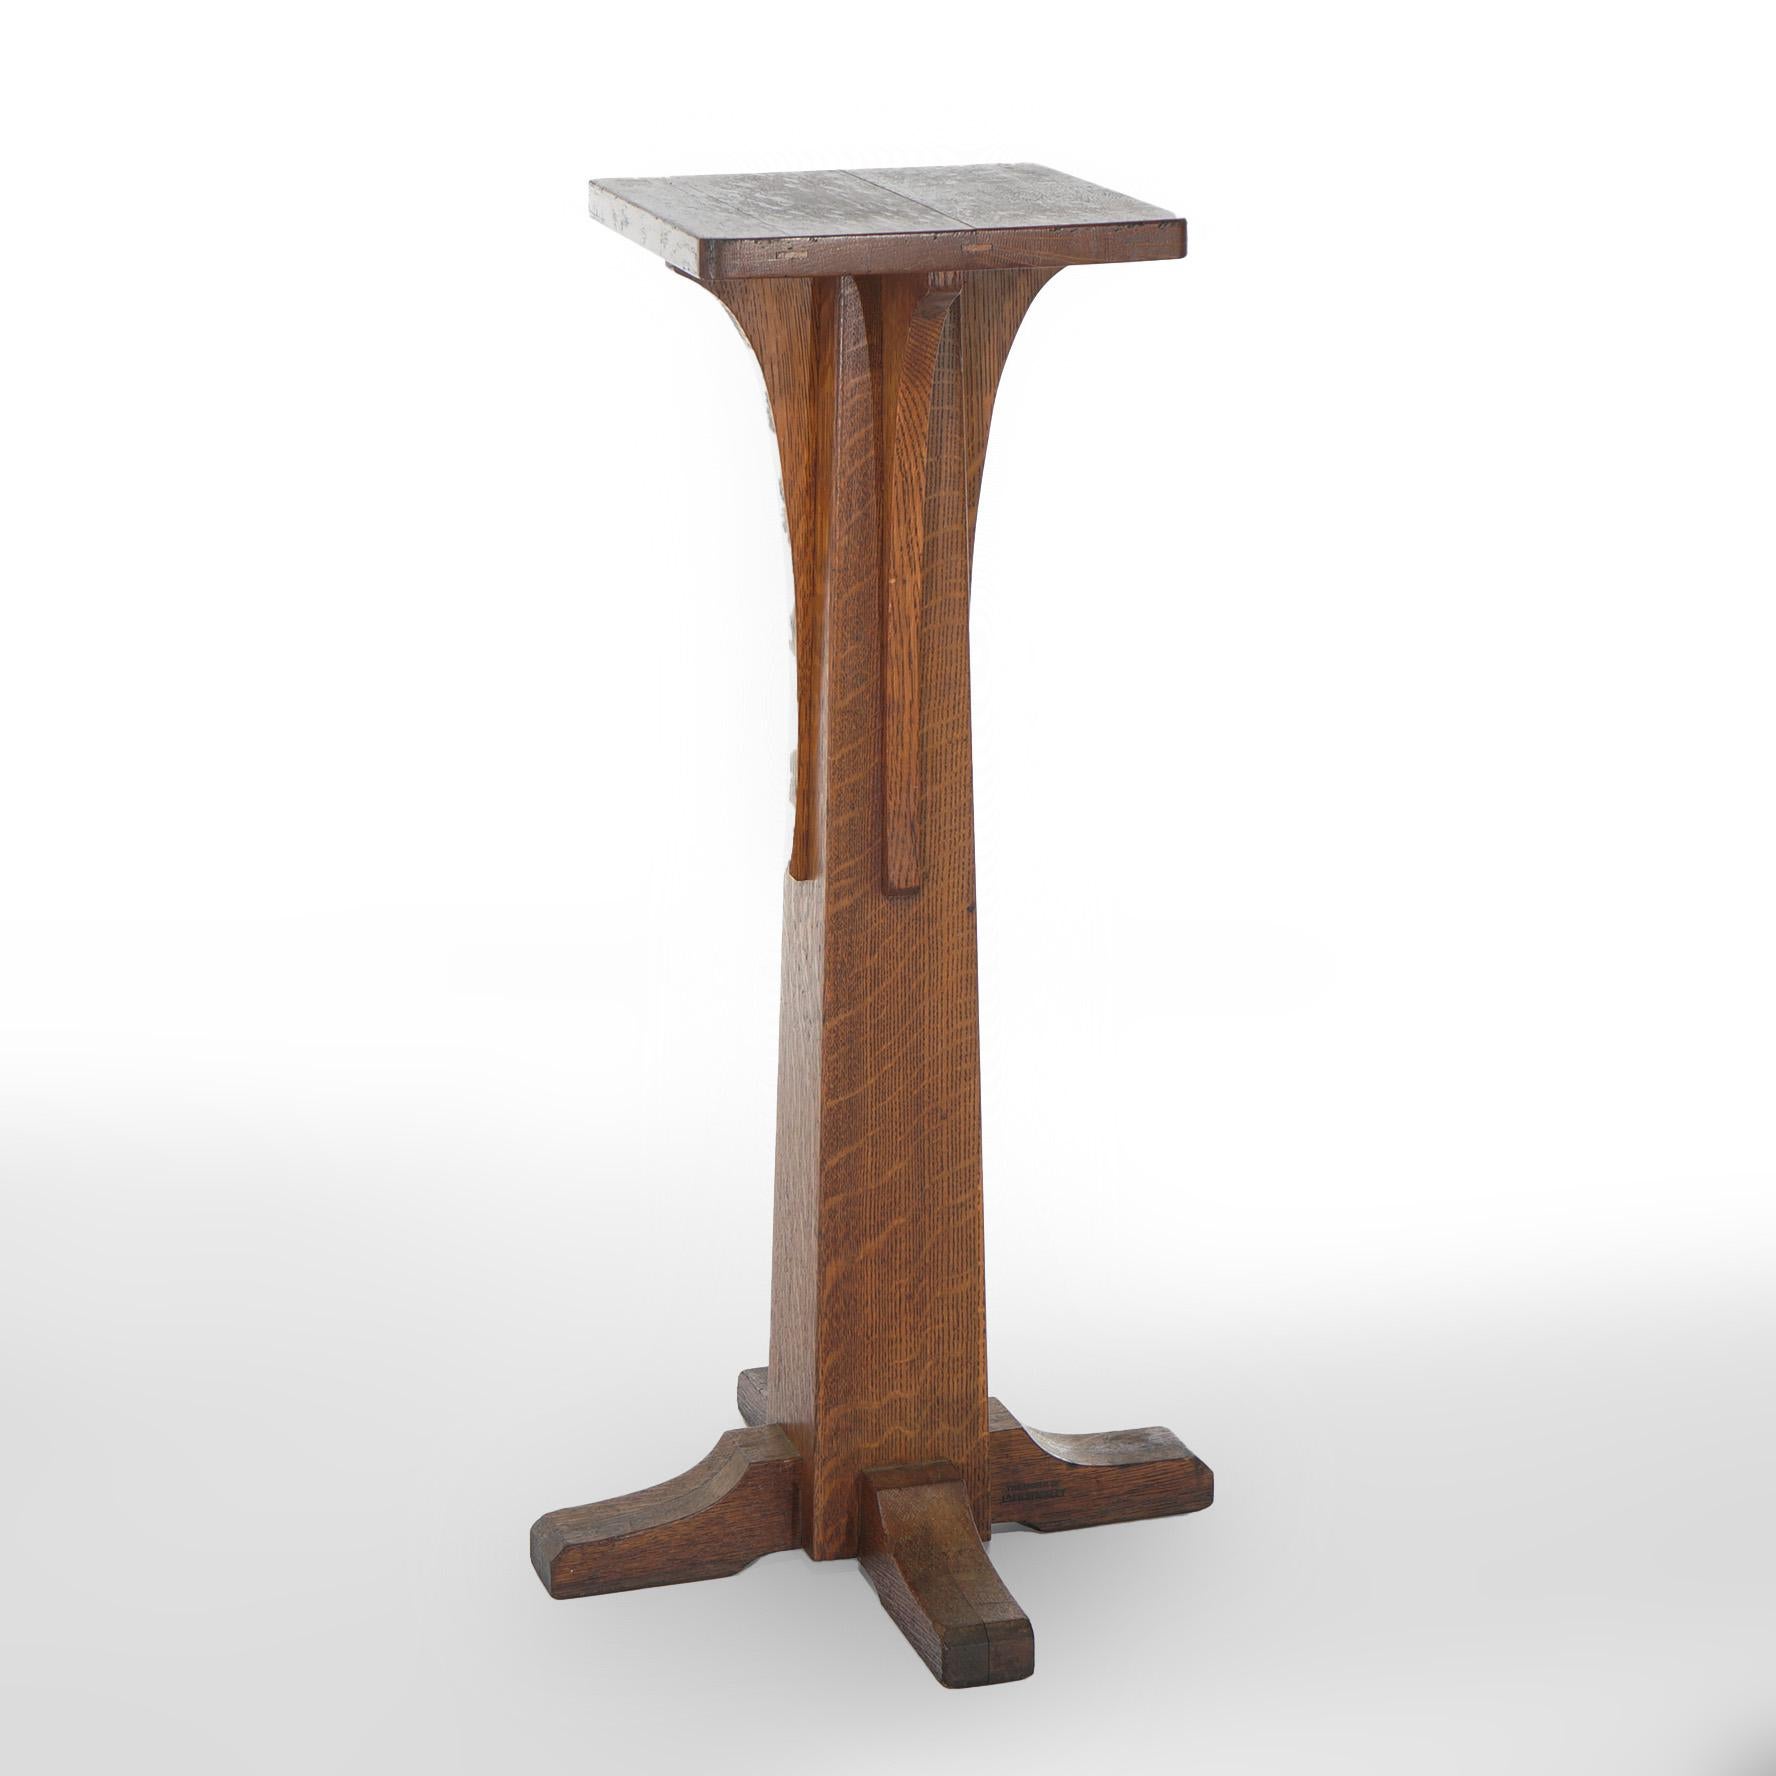 An antique Arts and Crafts plant or sculpture stand offers quarter sawn oak construction with spline top over flared column base having elongated corbels and shoe feet, c1910

Measures - 36